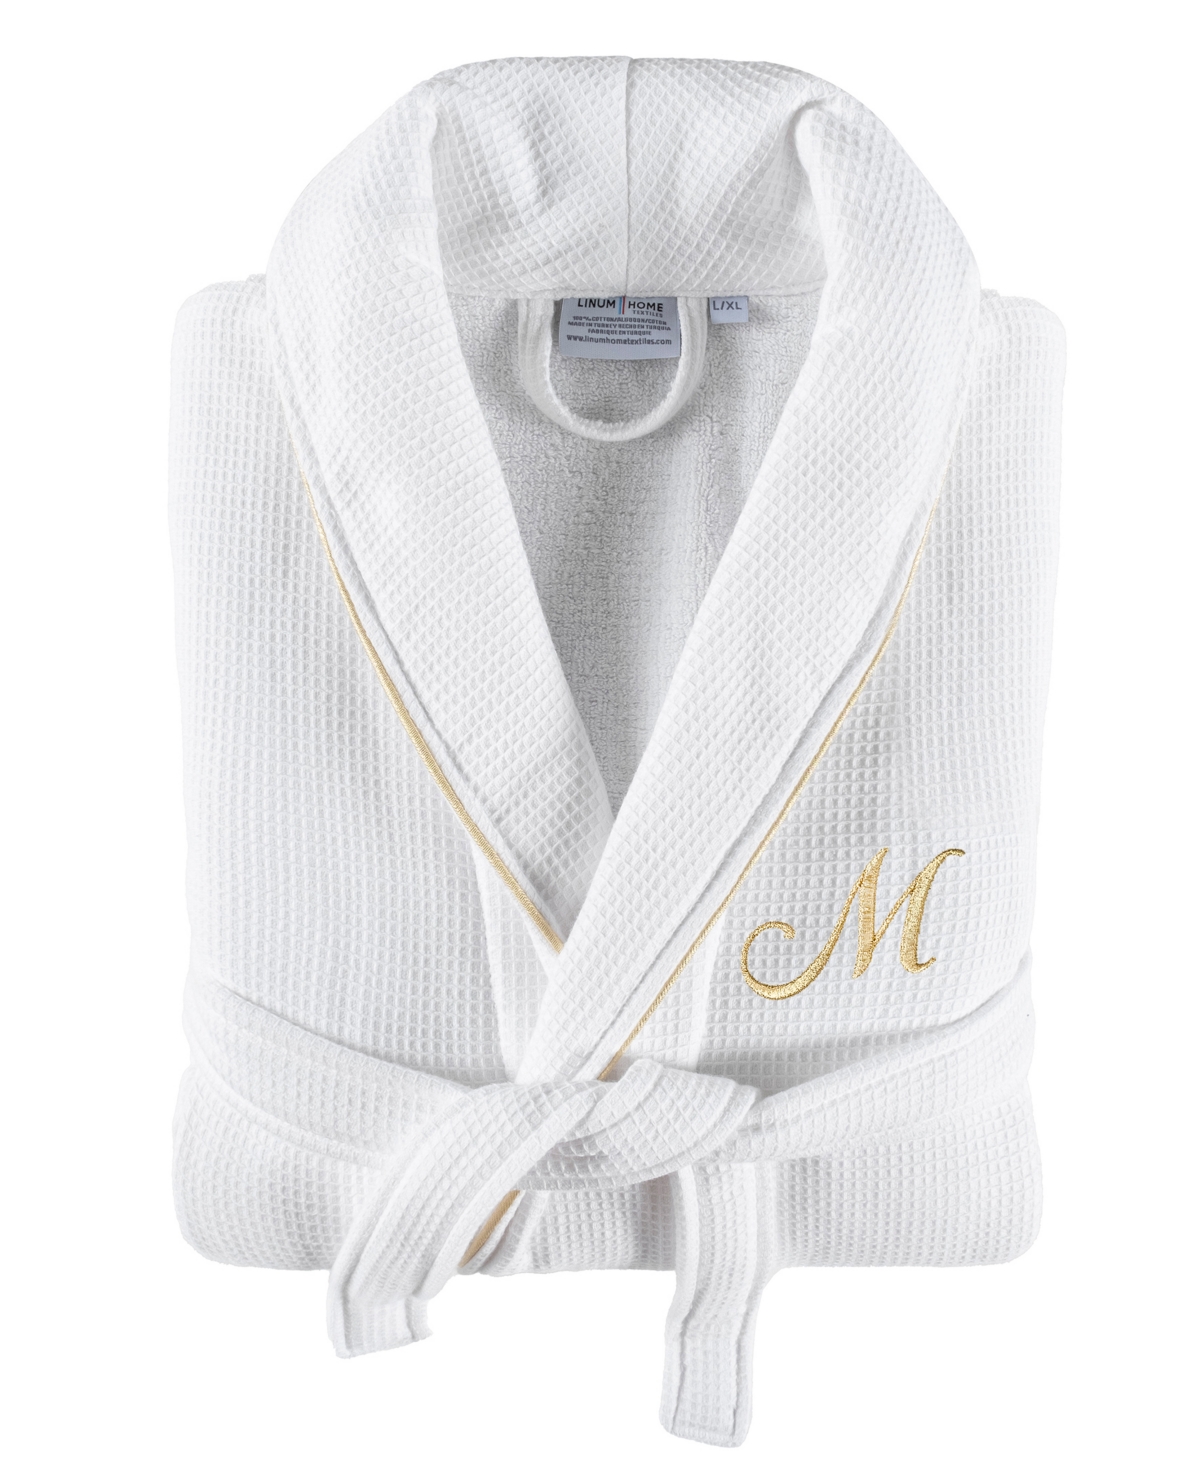 Linum Home Textiles 100% Turkish Cotton Unisex Personalized Waffle Weave Terry Bathrobe With Satin Piped Trim In White M